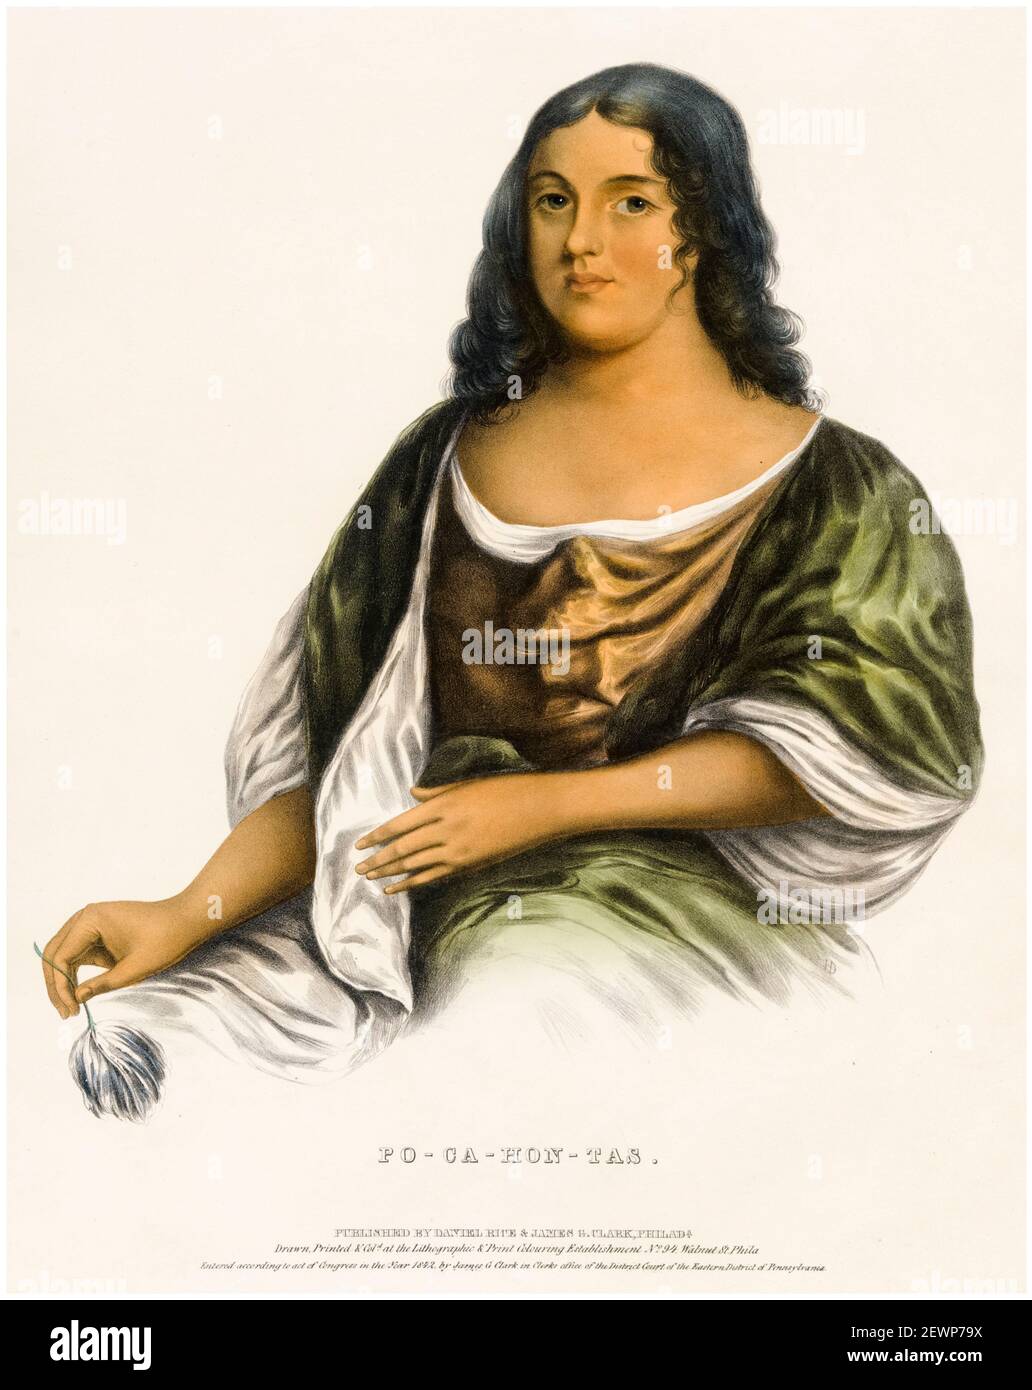 Pocahontas (c1595-1617), Native American woman of the Powhatan People, print by HD, copy after Robert Matthew Sully, 1842 Stock Photo